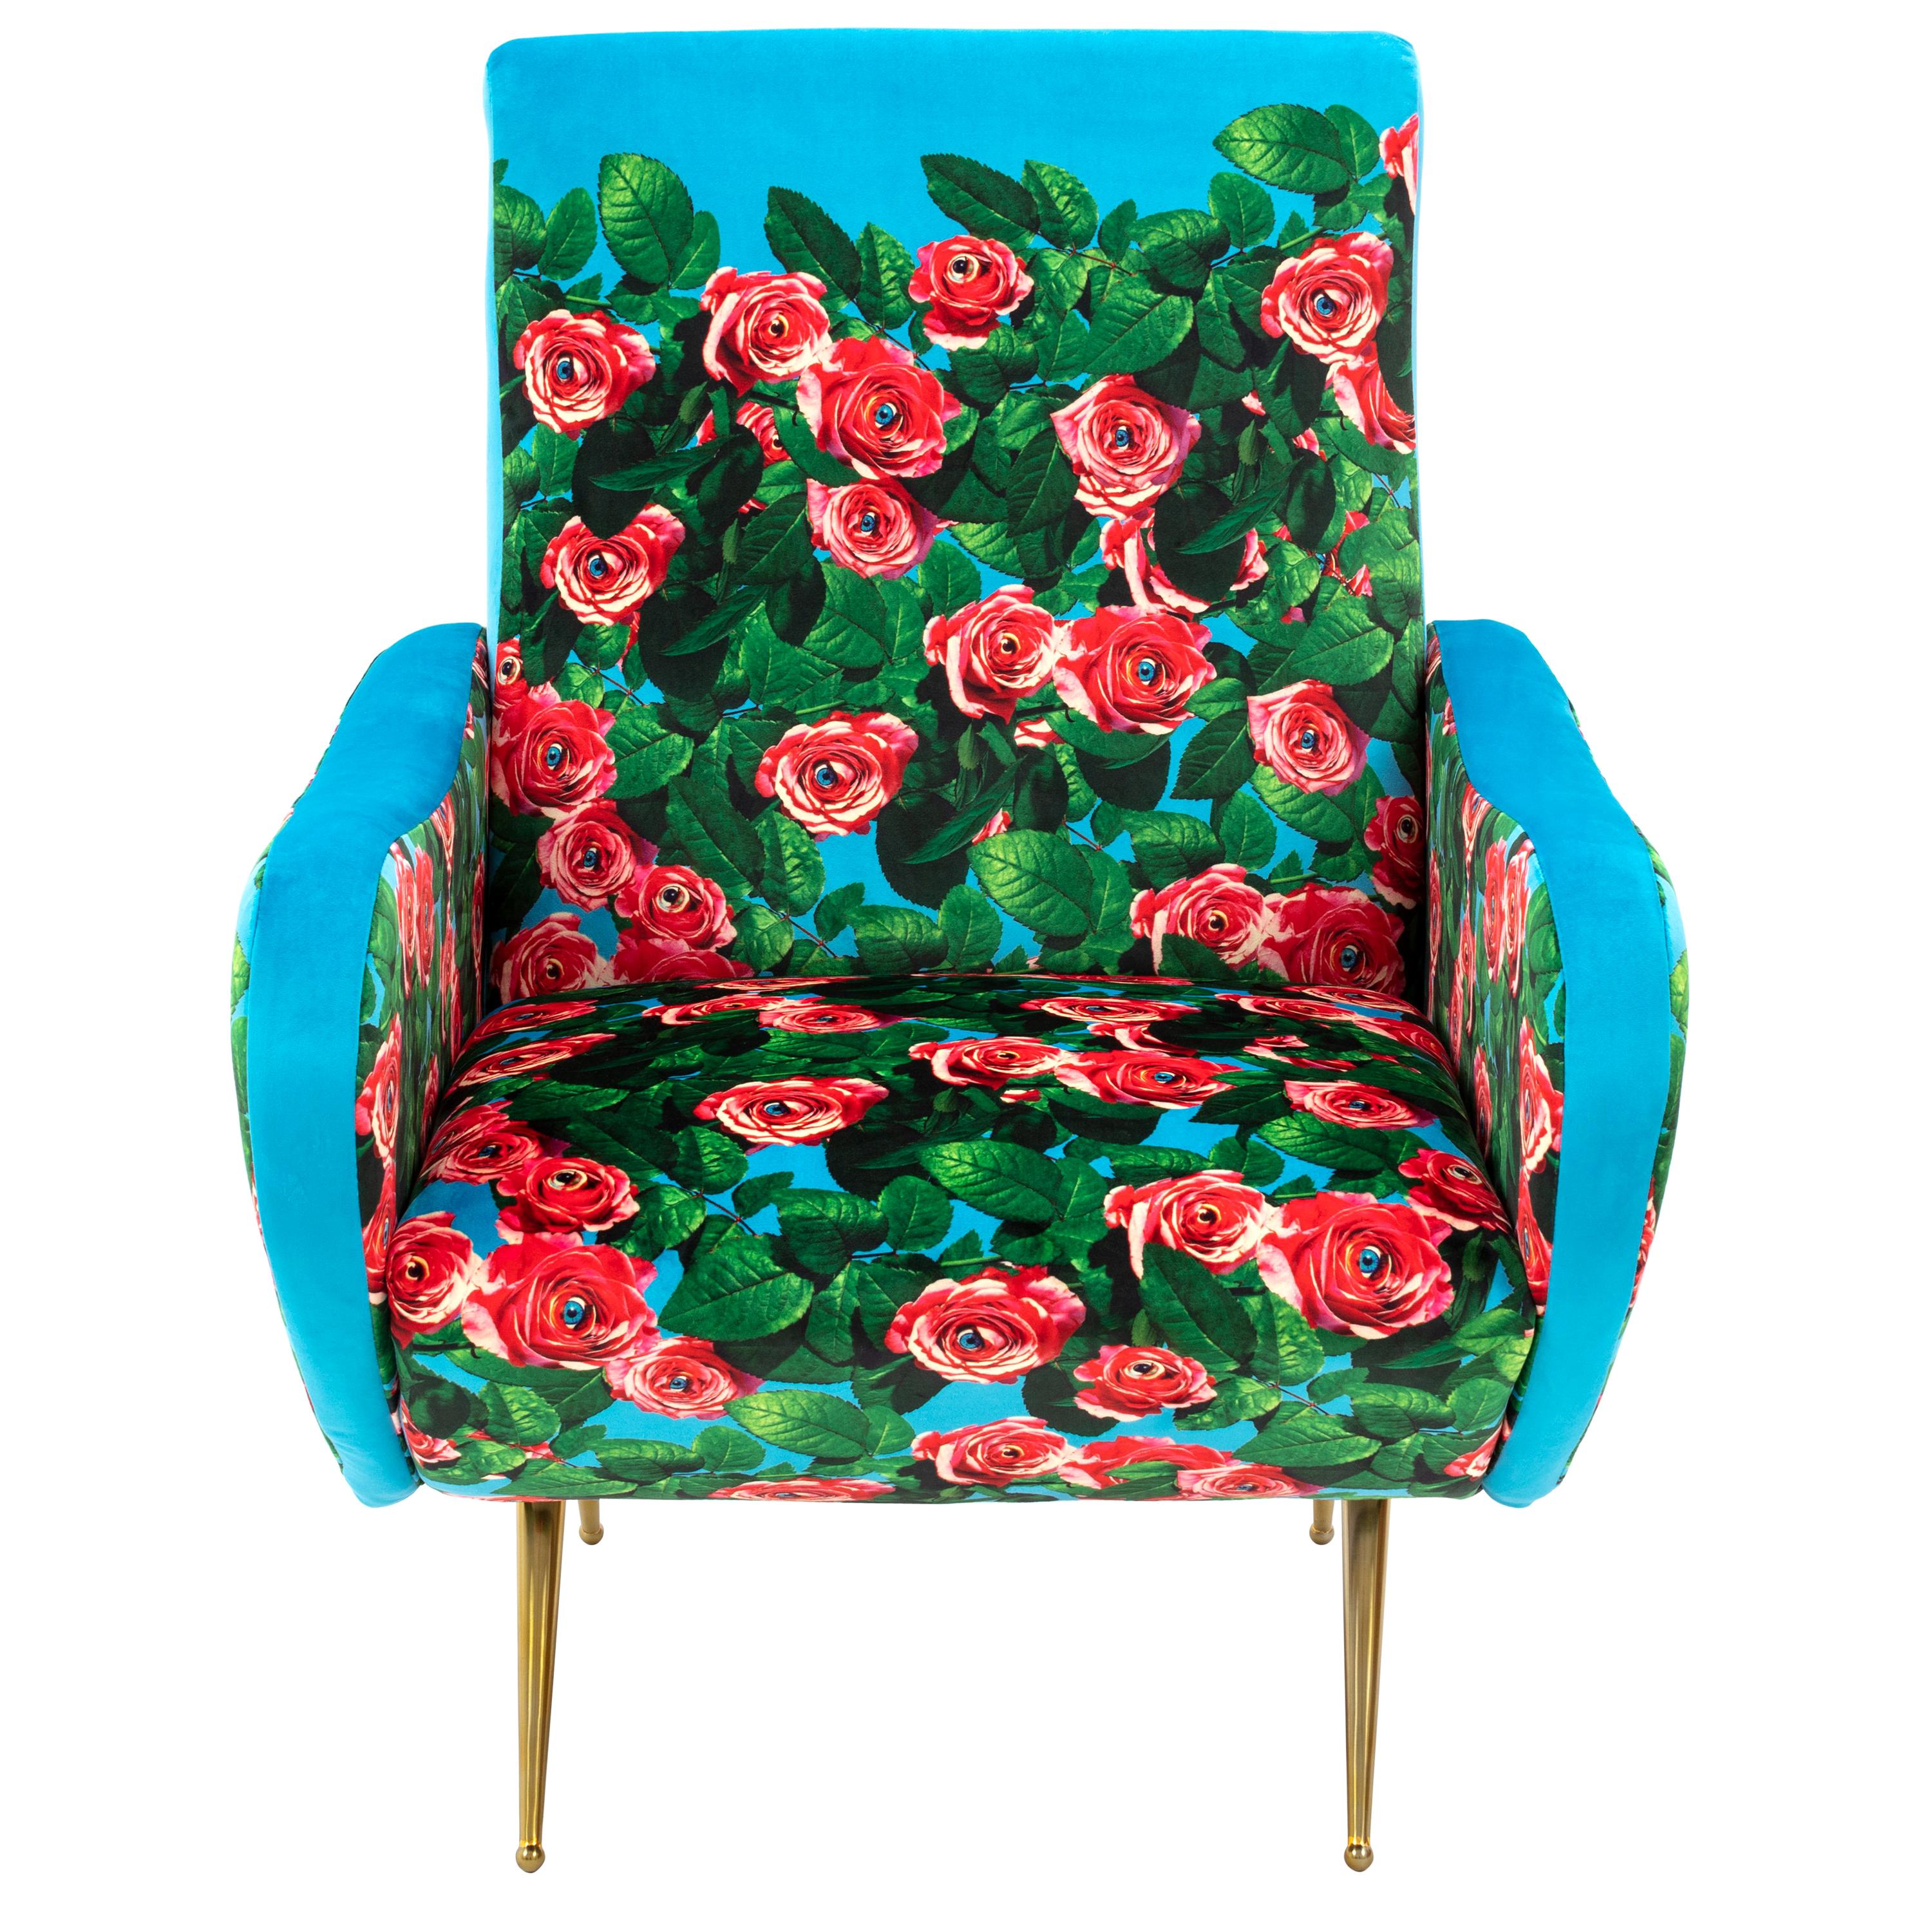 Seletti "Roses" Upholstered Armchair by Toiletpaper Magazine